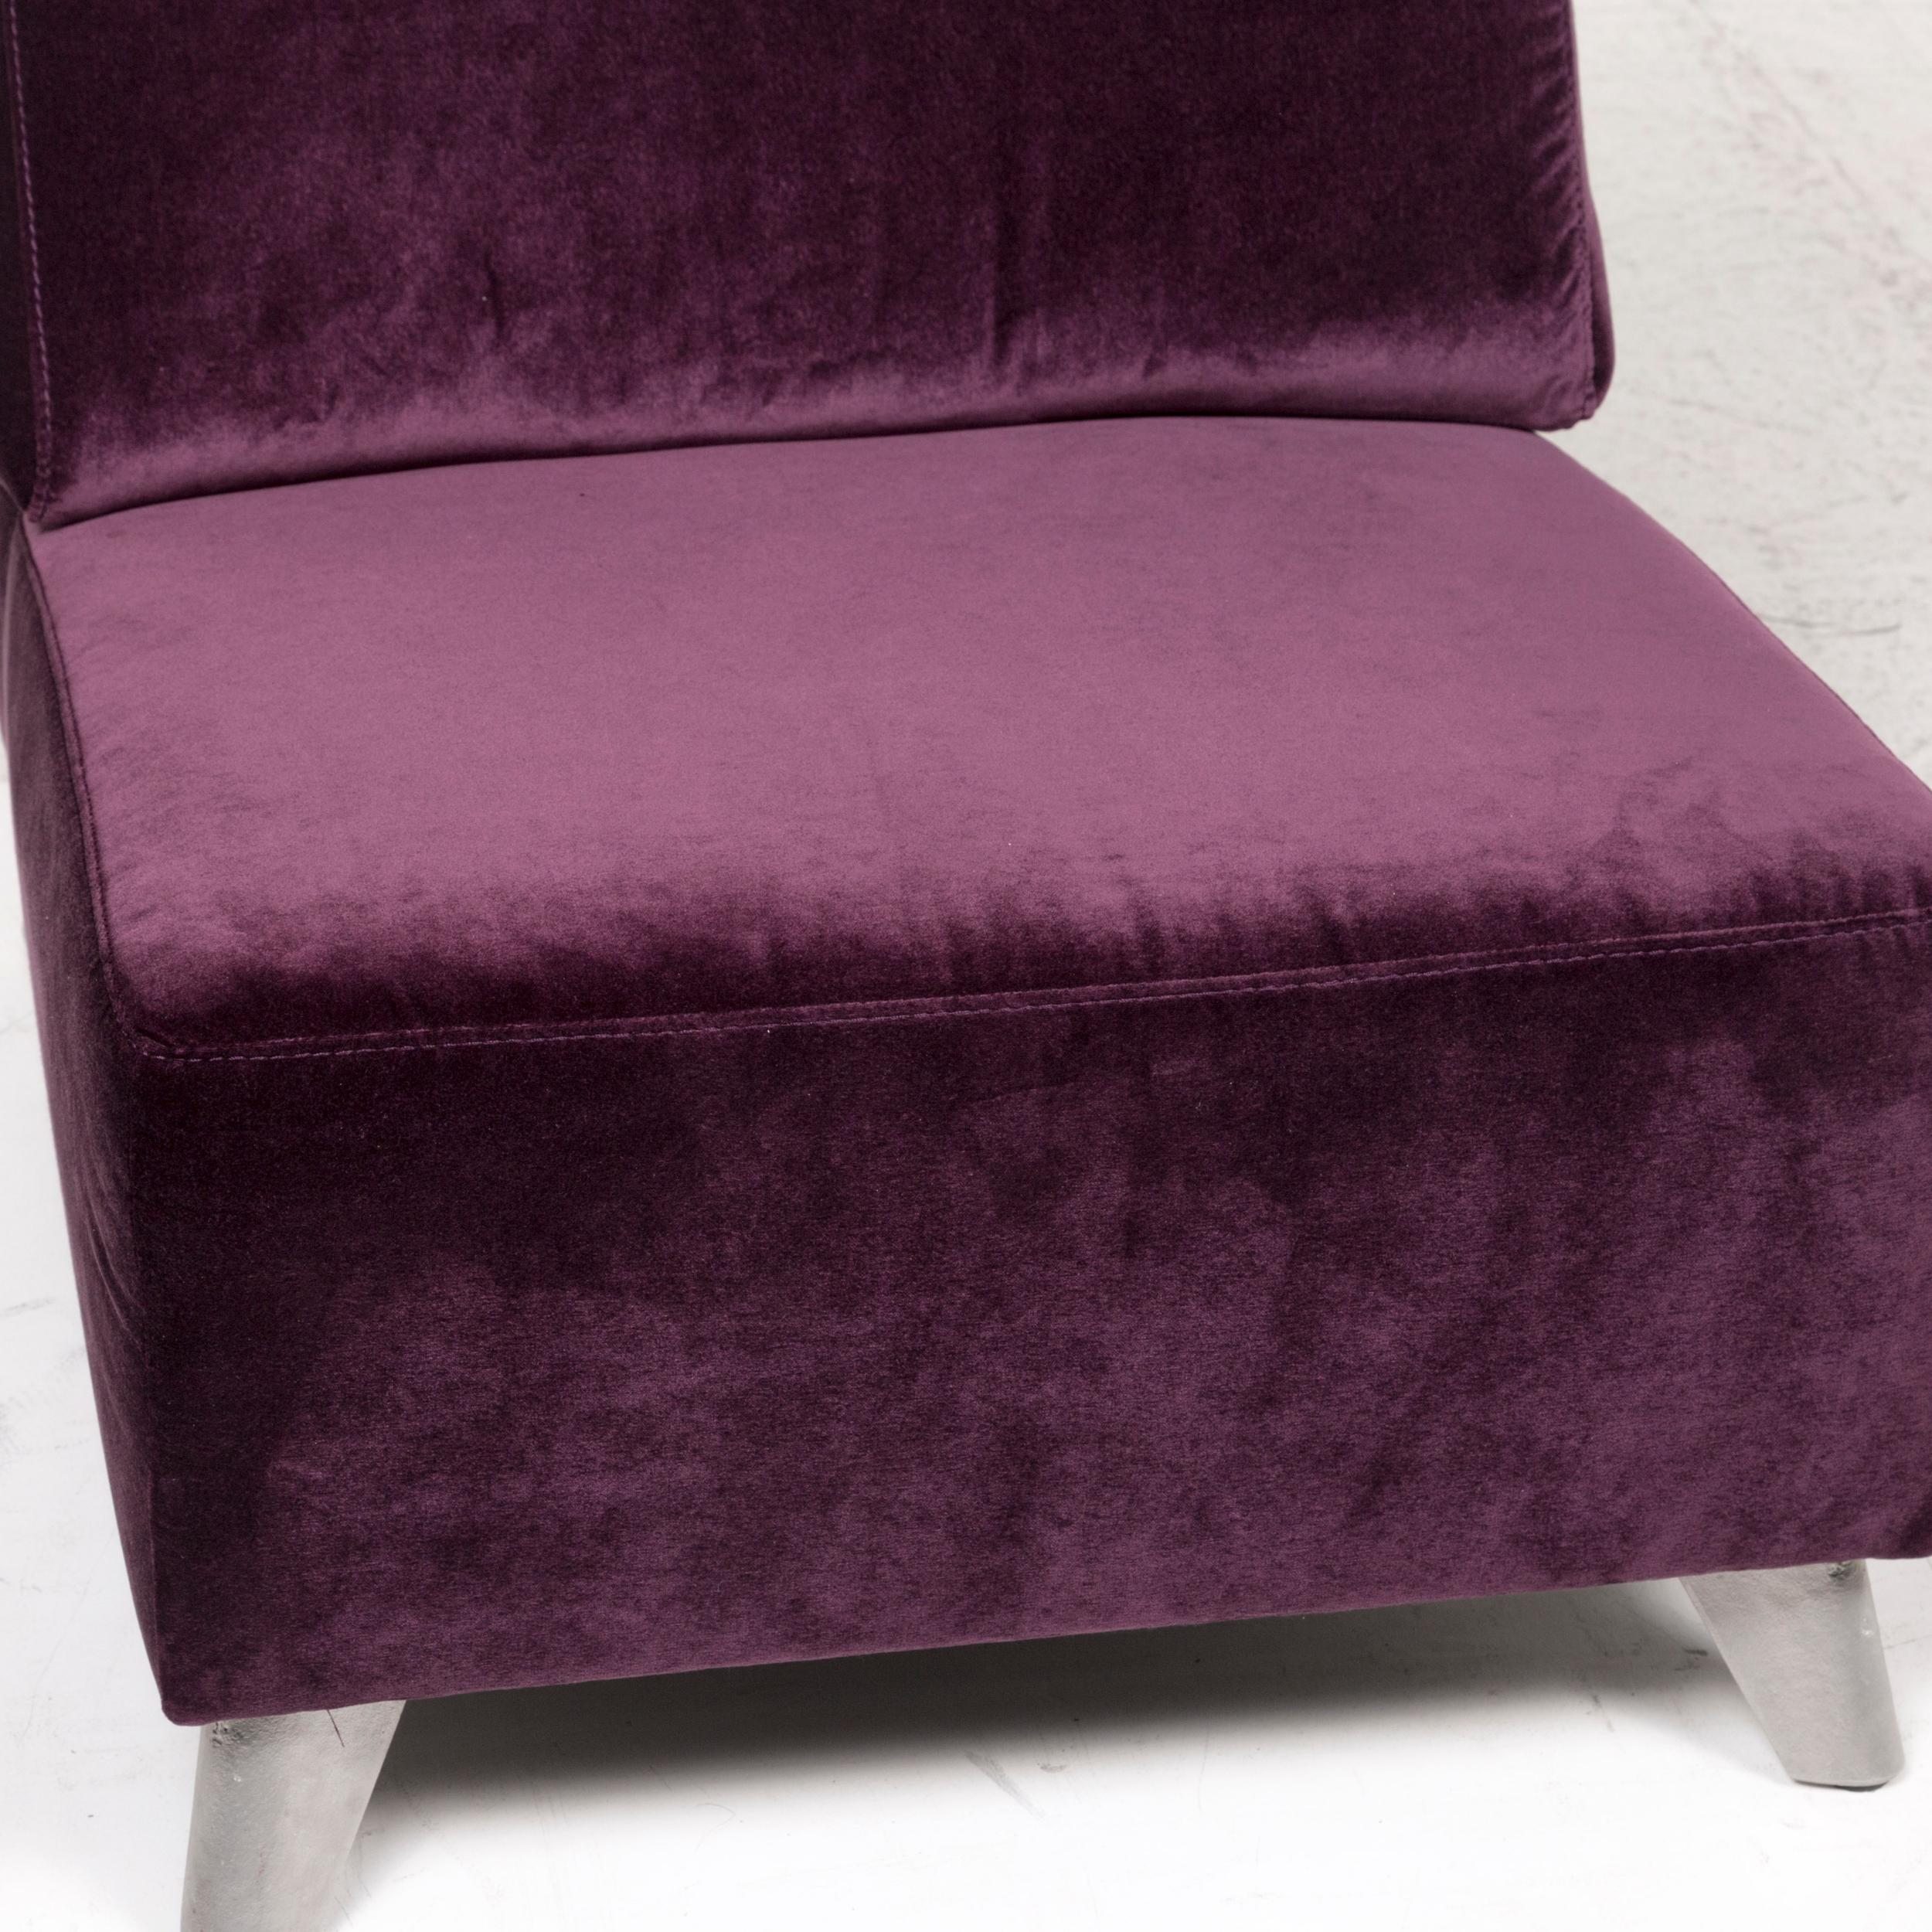 We bring to you a Bretz armchair purple.


 Product measurements in centimeters:
 

Depth 96
Width 61
Height 74
Seat-height 37
Rest-height
Seat-depth 52
Seat-width 61
Back-height 42.

 